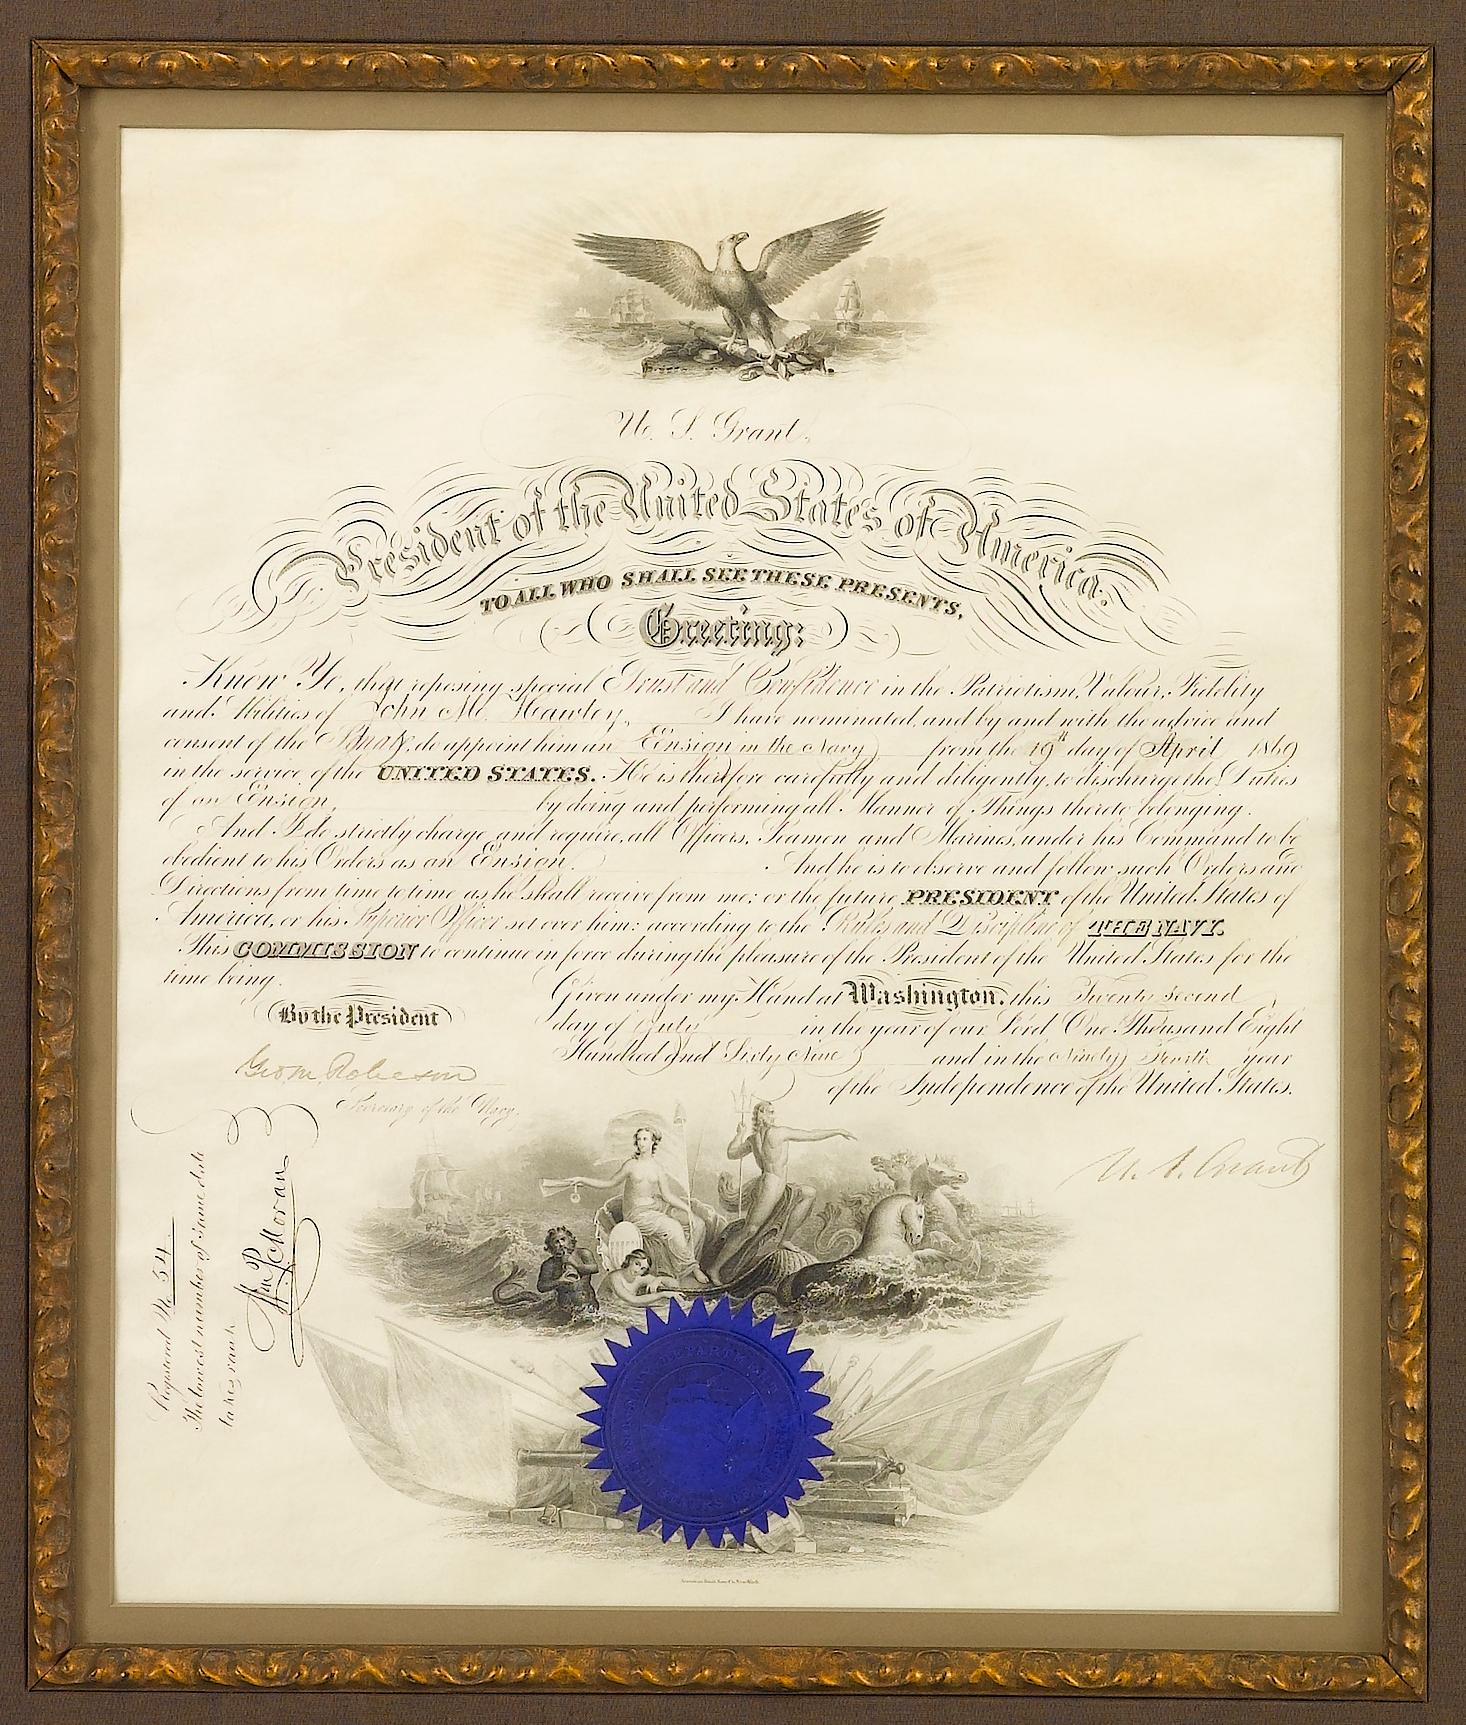 This is an authentic Presidential Appointment, signed by U.S. Grant as President on July 22, 1869. The document is a partially printed official document appointing John W. Hawley as Ensign in the Navy. The appointment is countersigned by Secretary